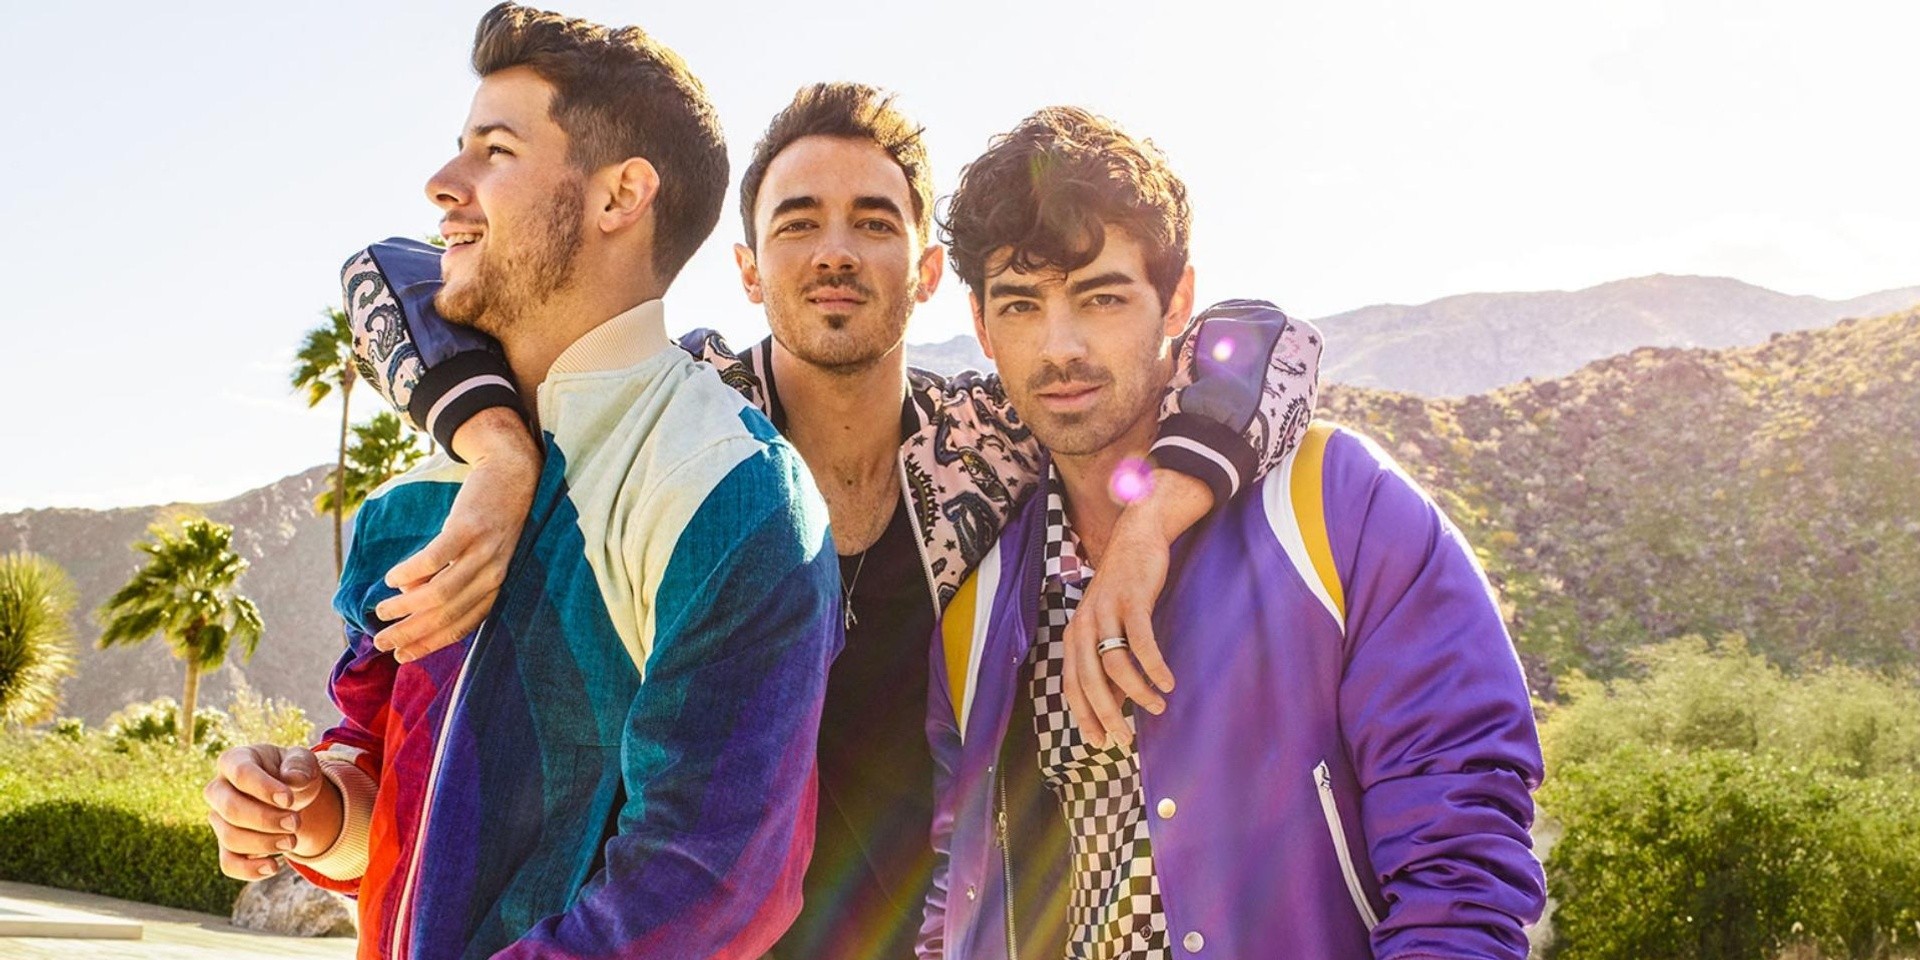 Jonas Brothers announce first album in 10 years, Happiness Begins 